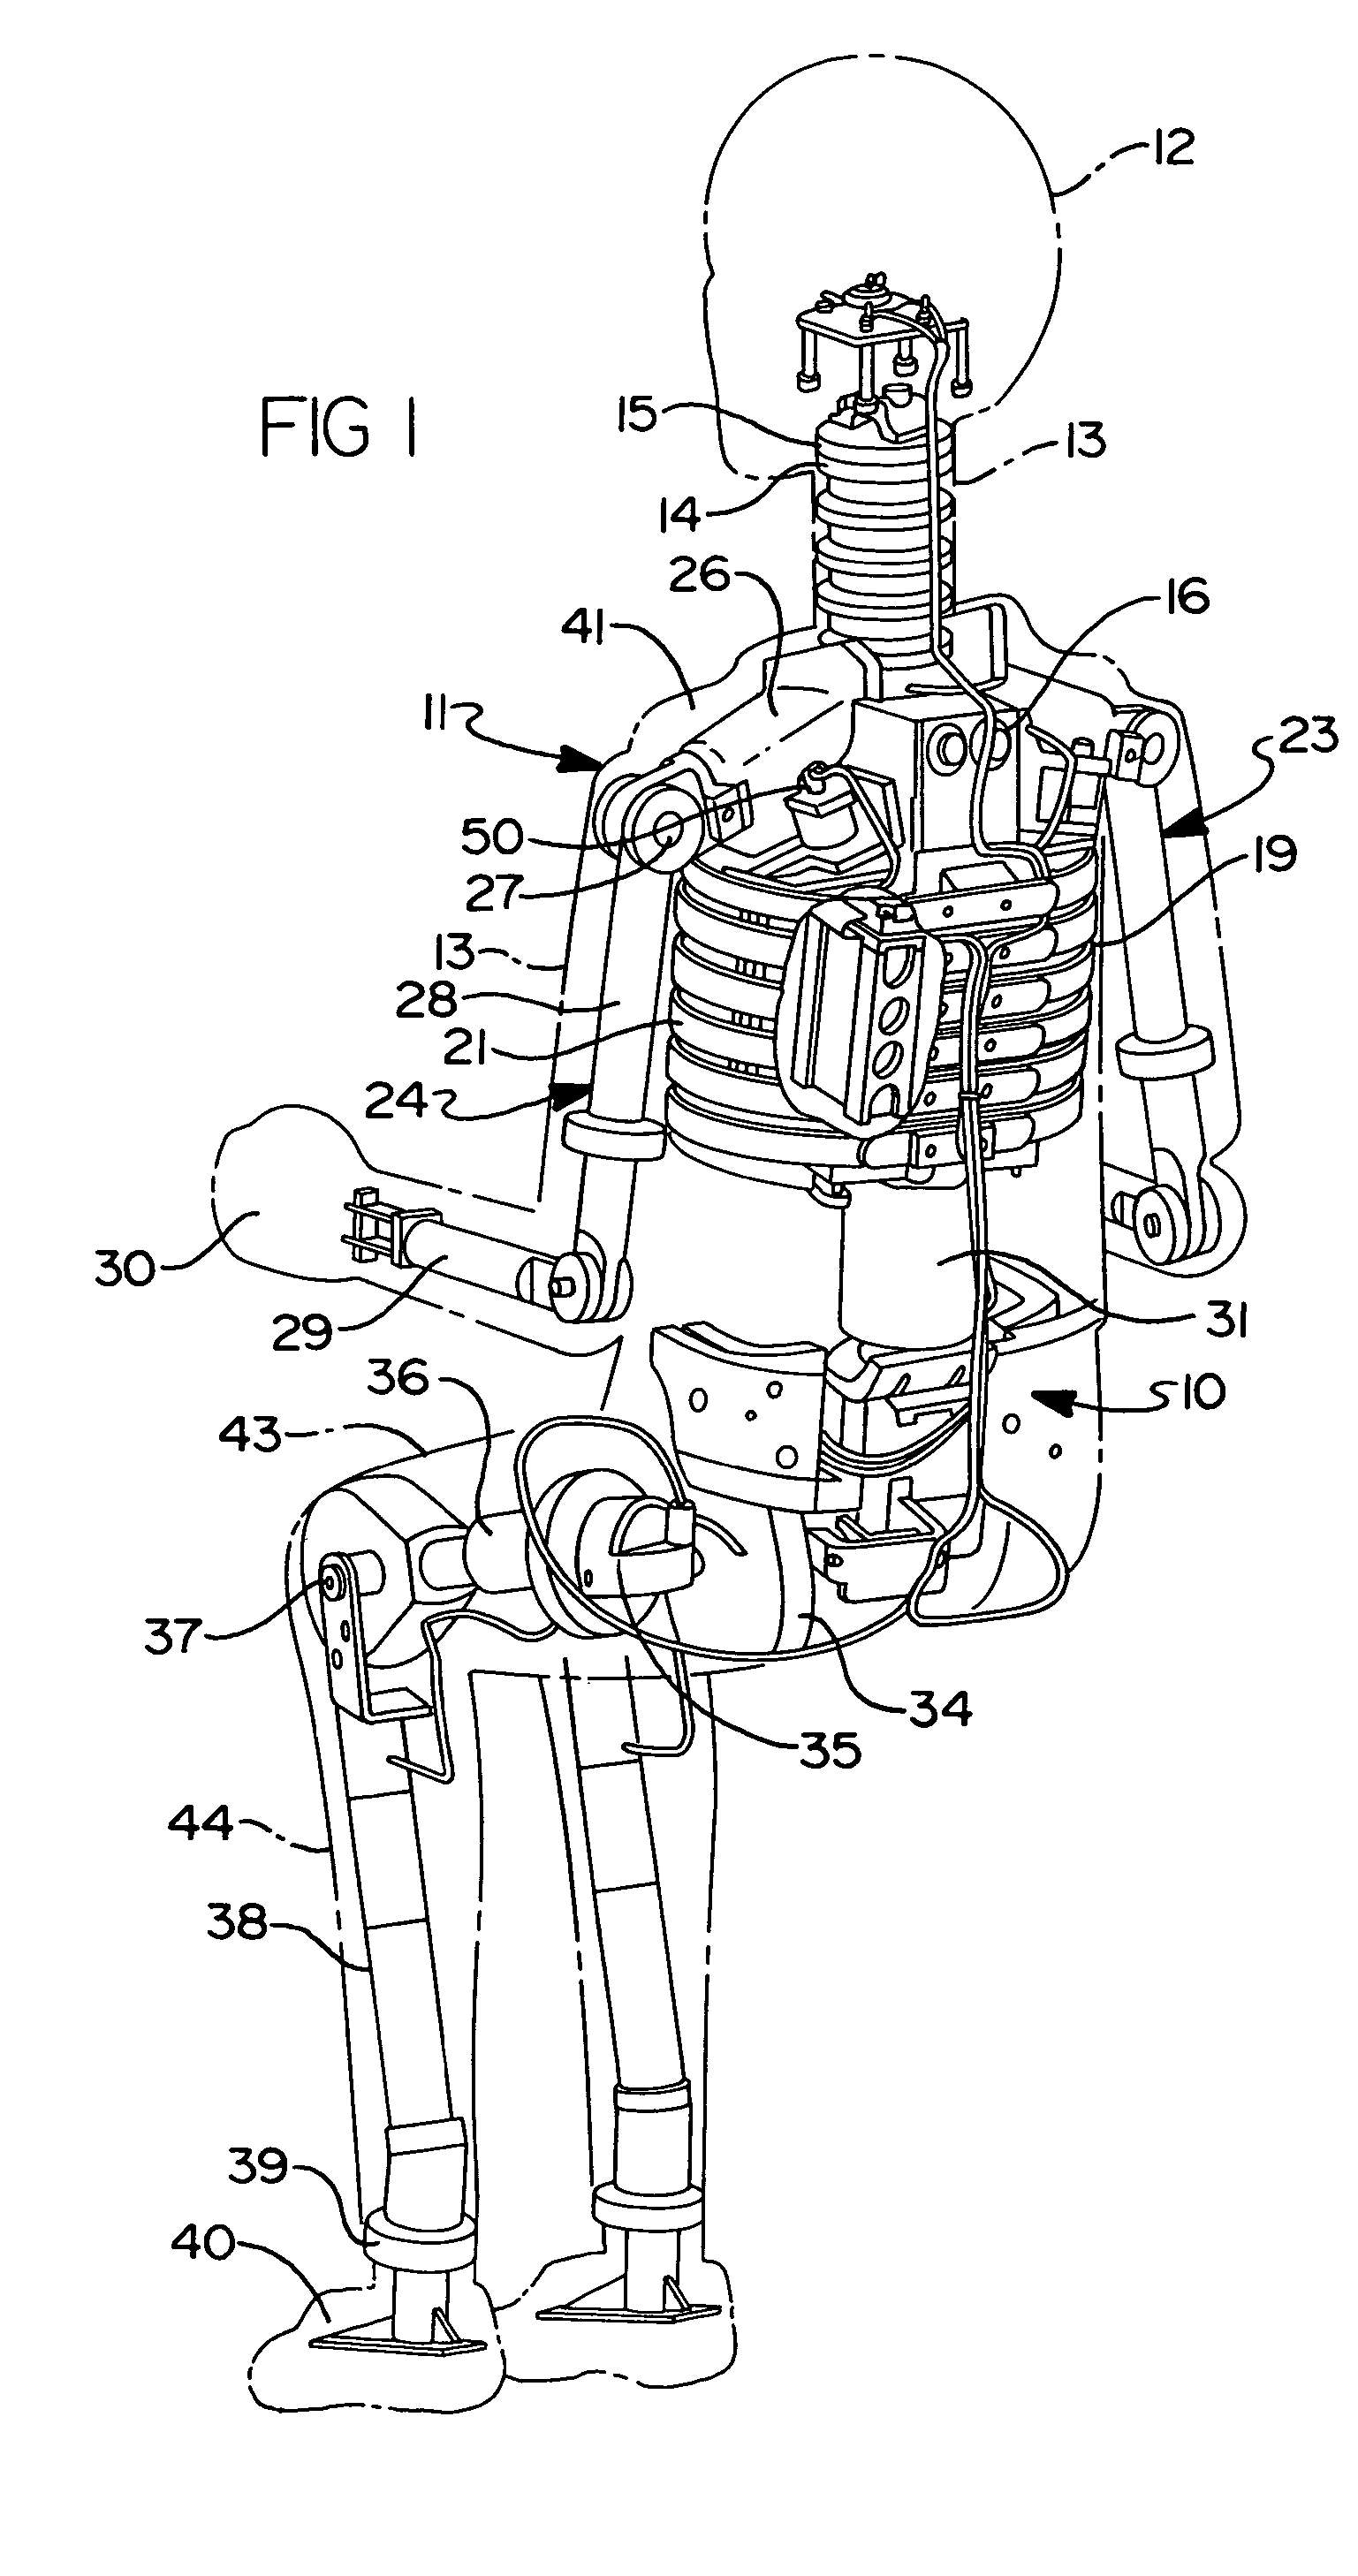 Flexible printed circuit cabling system for crash test dummy